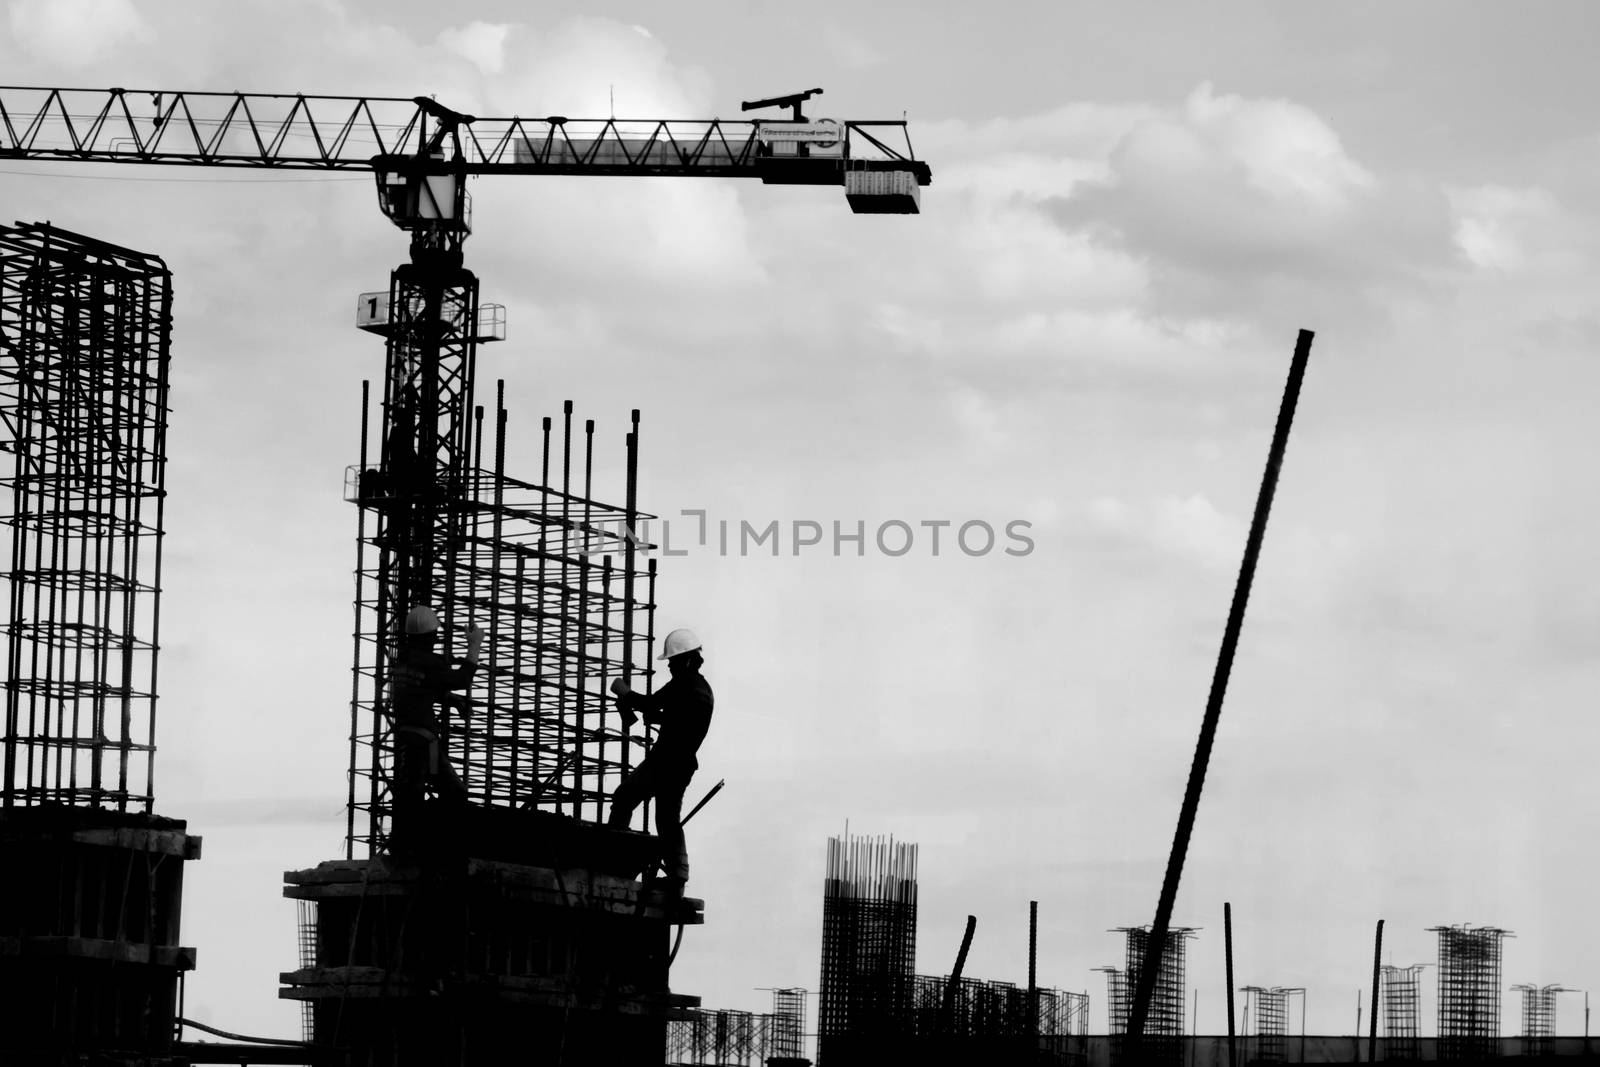 The building construction site silhouettes.